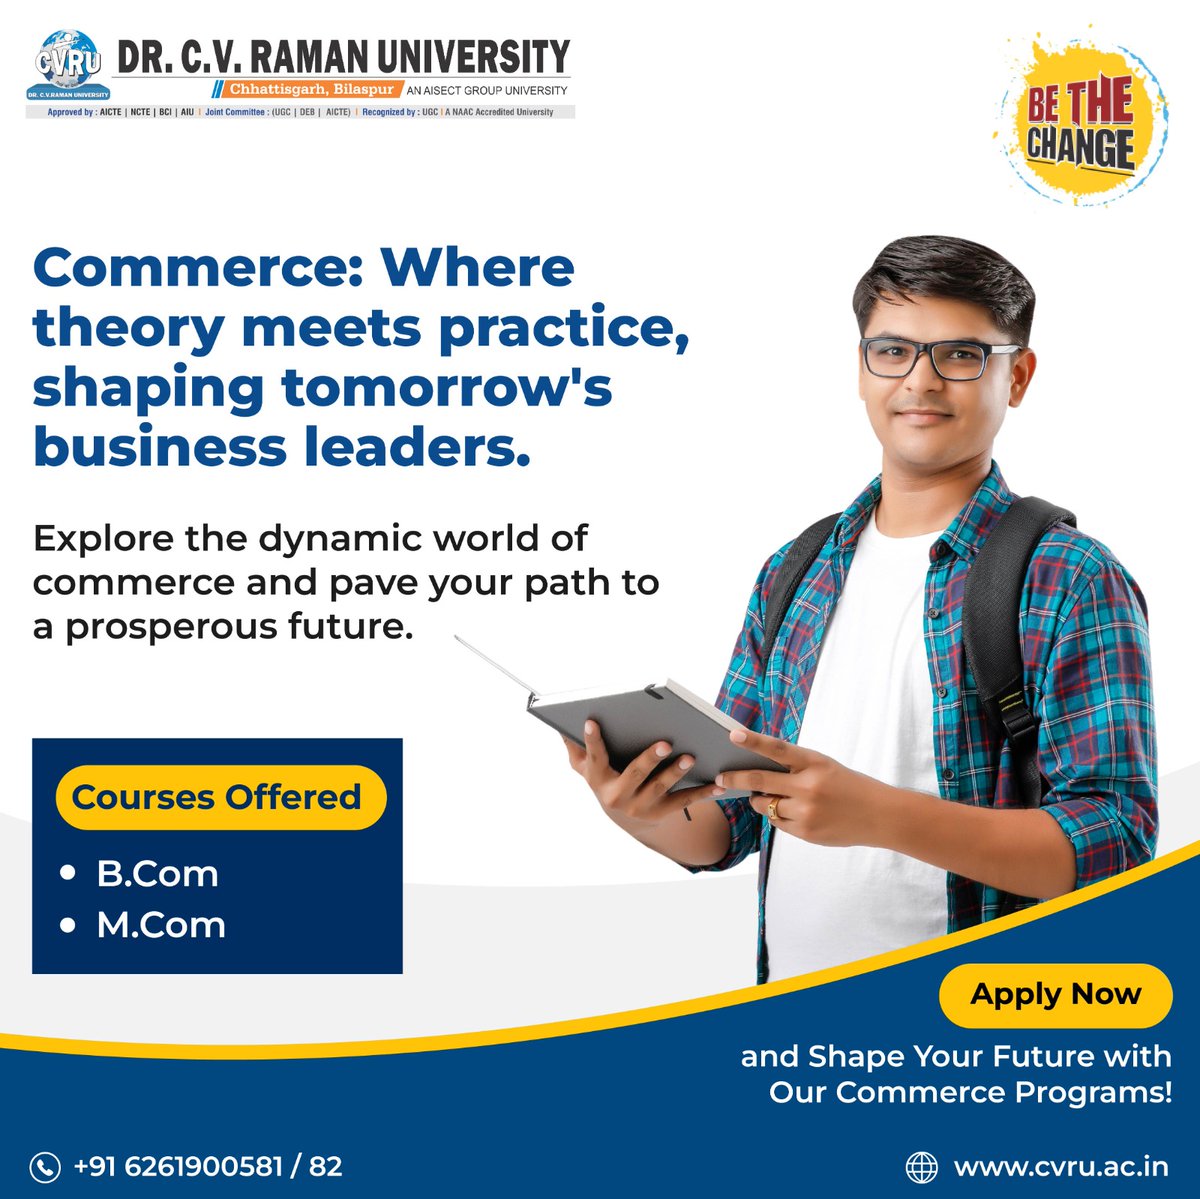 Shape your future in commerce with our B.Com and M.Com programs. Apply now!

#CommerceEducation #BCom #MCom #ApplyNow #ShapeYourFuture #CVRUCG